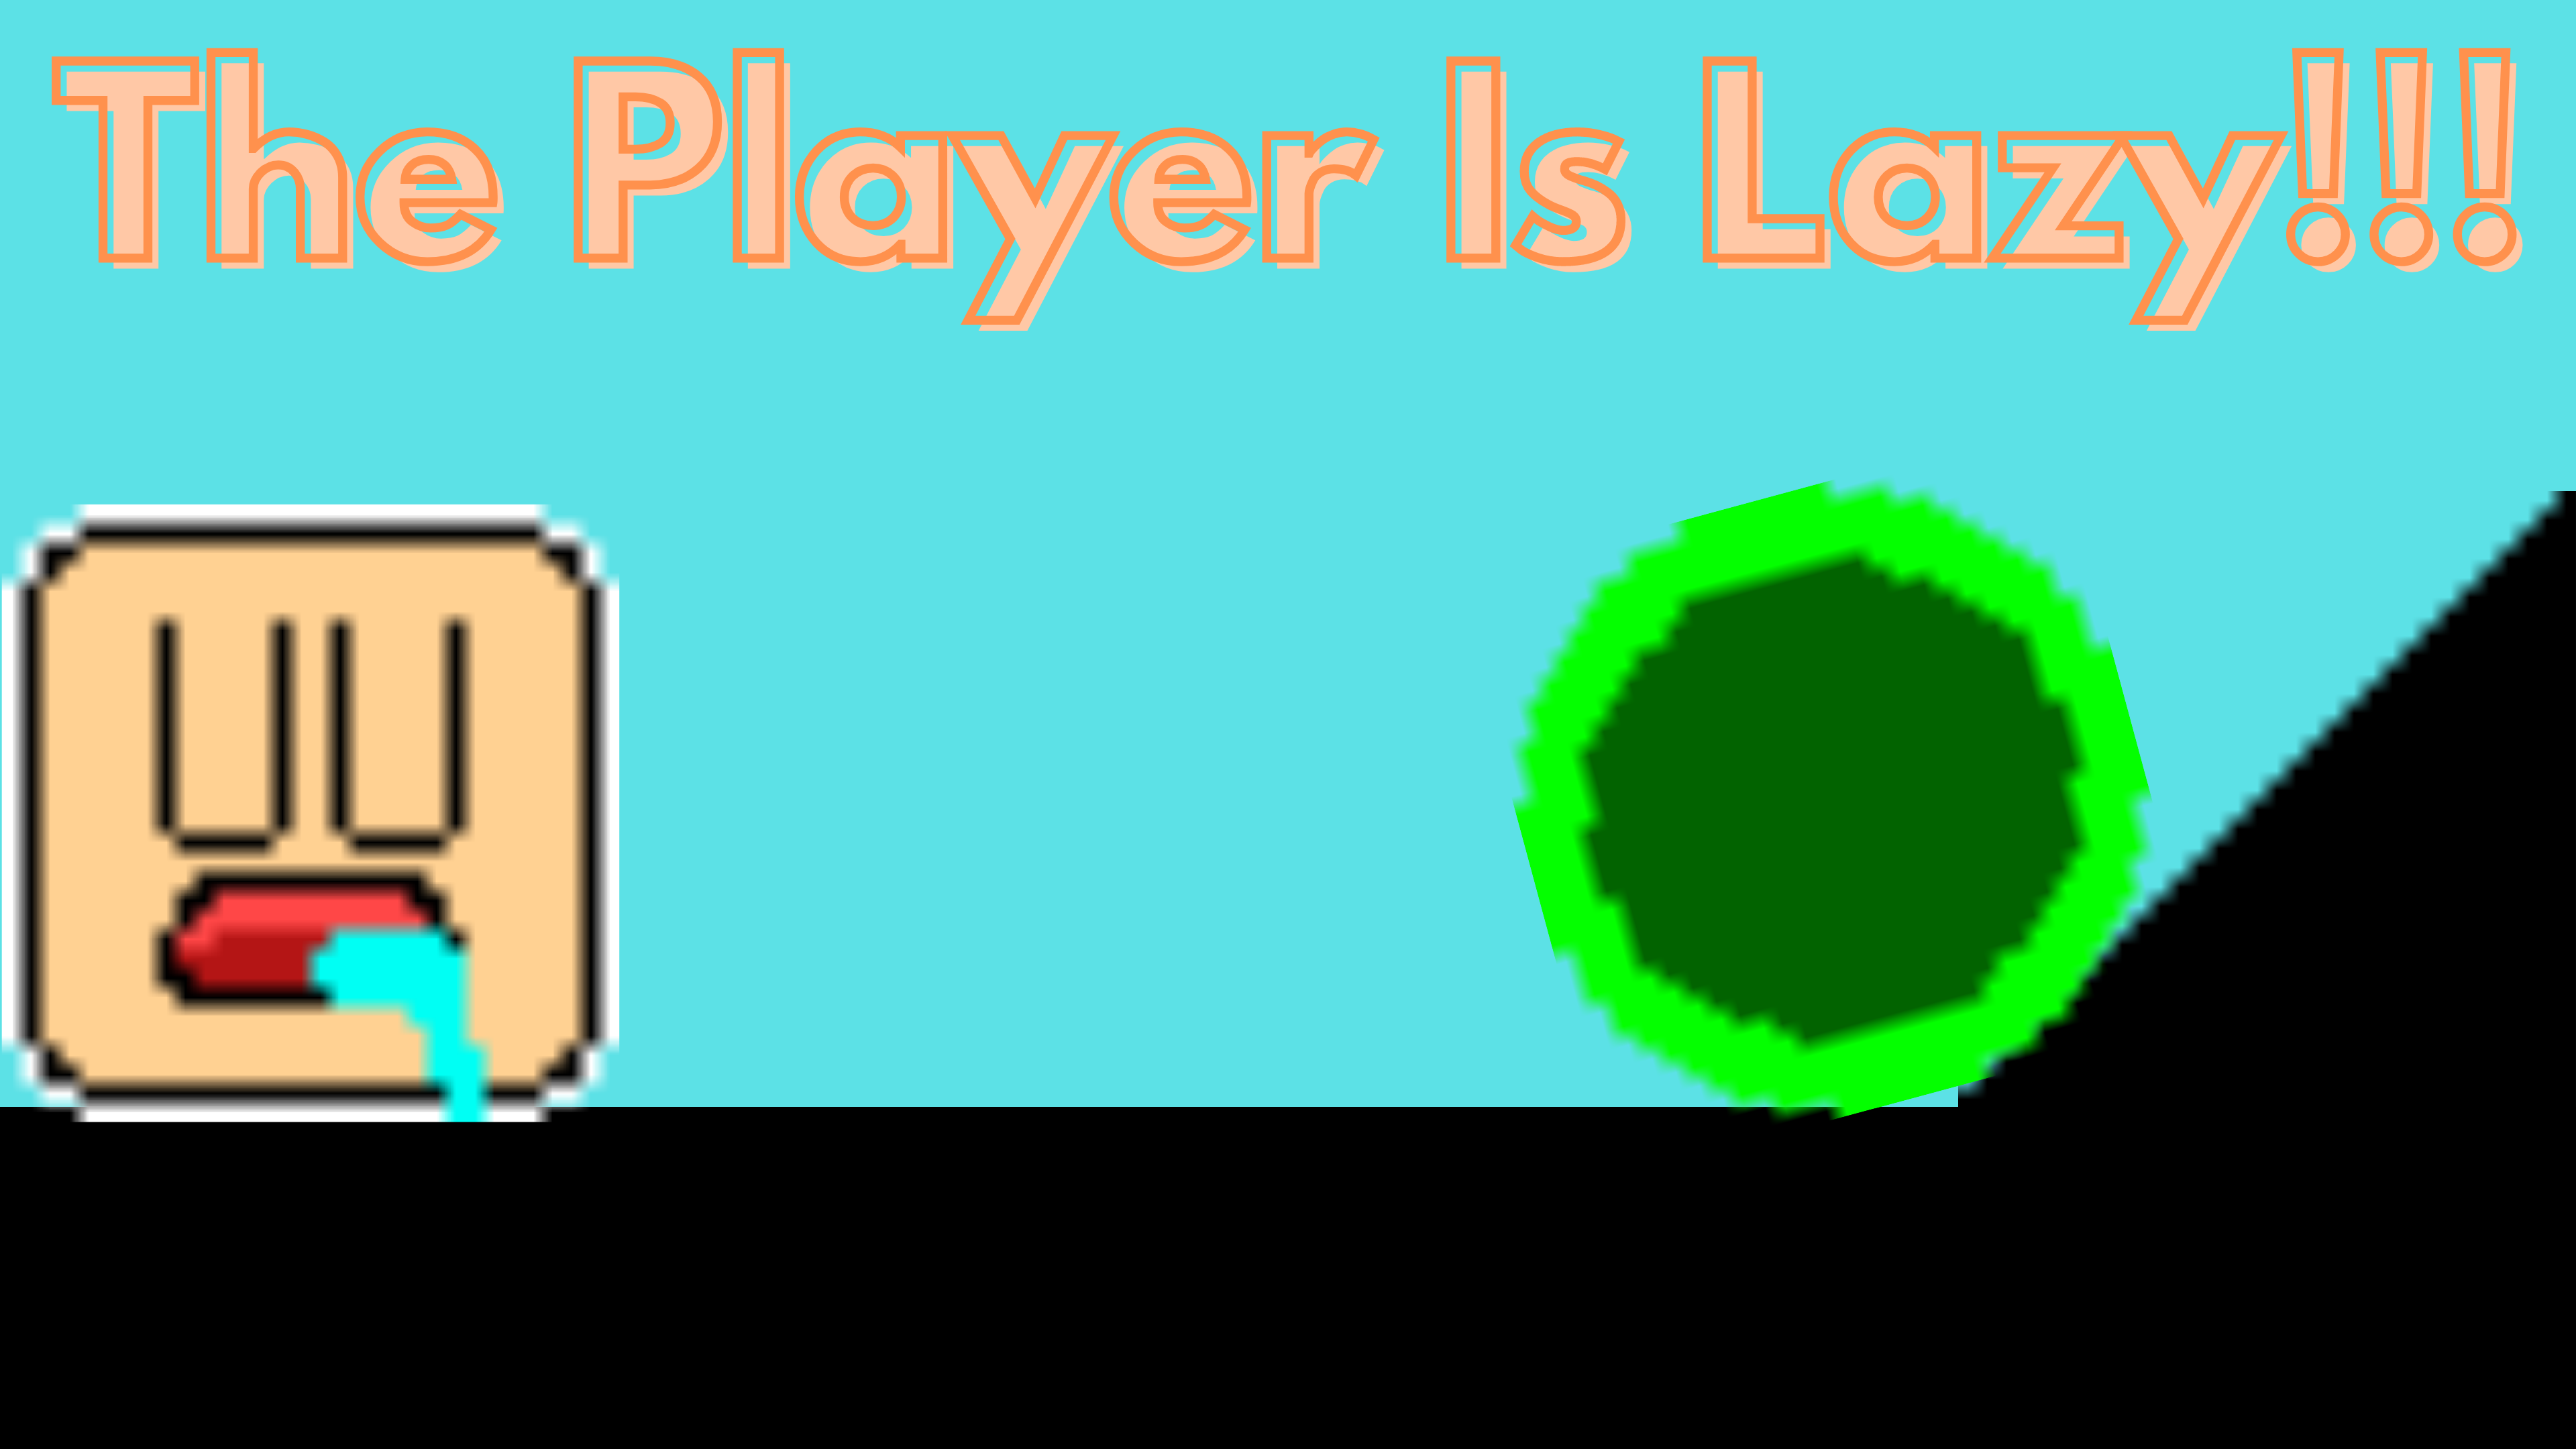 The Player Is Lazy!!!